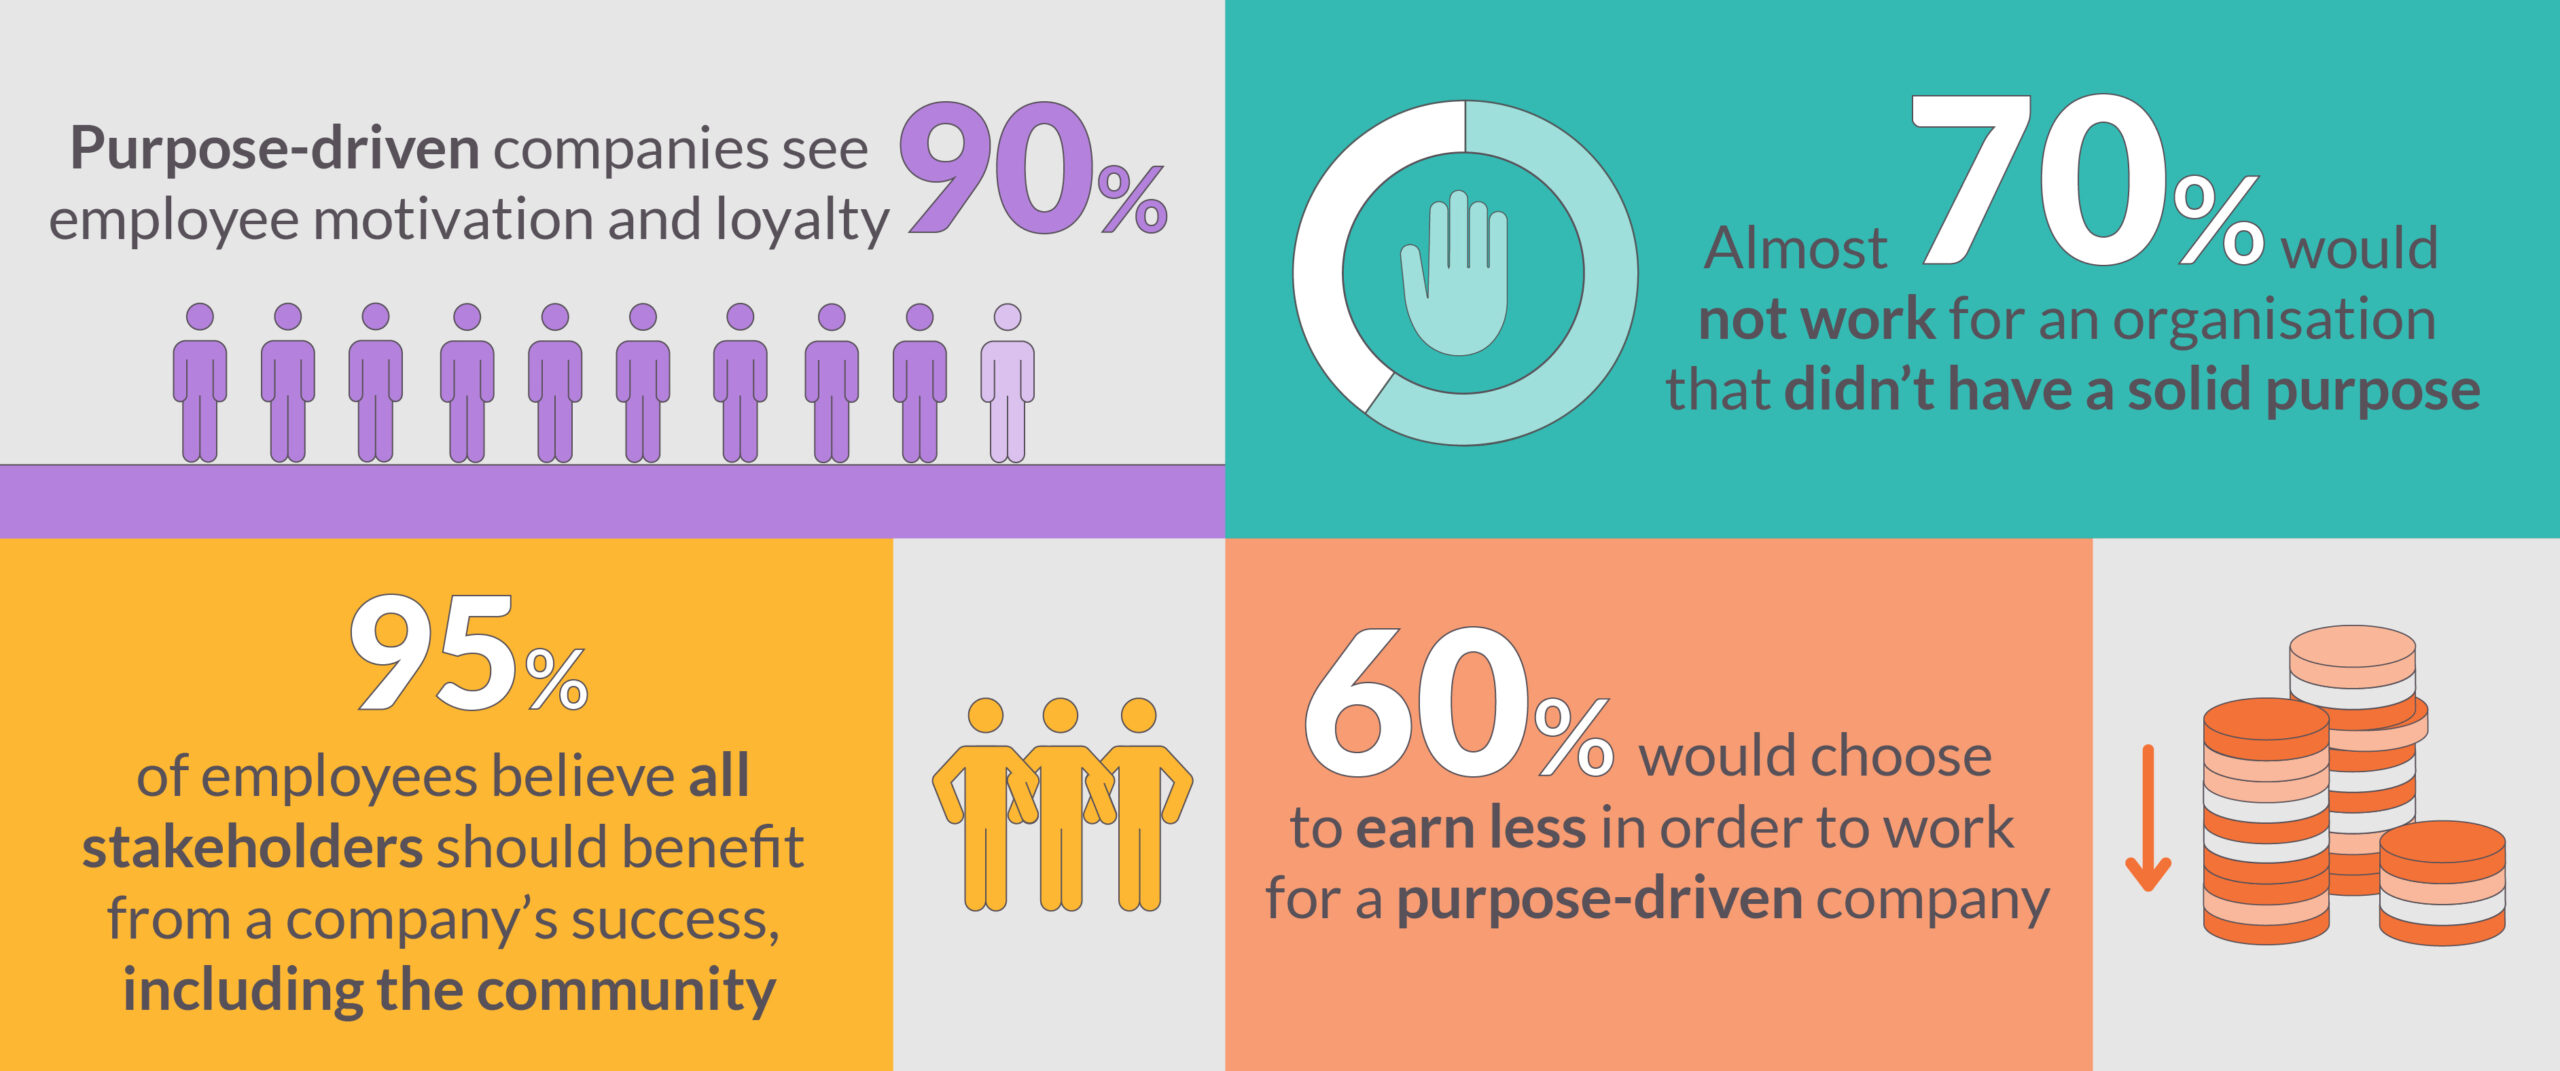 Infographic showing employees want companies to benefit communities